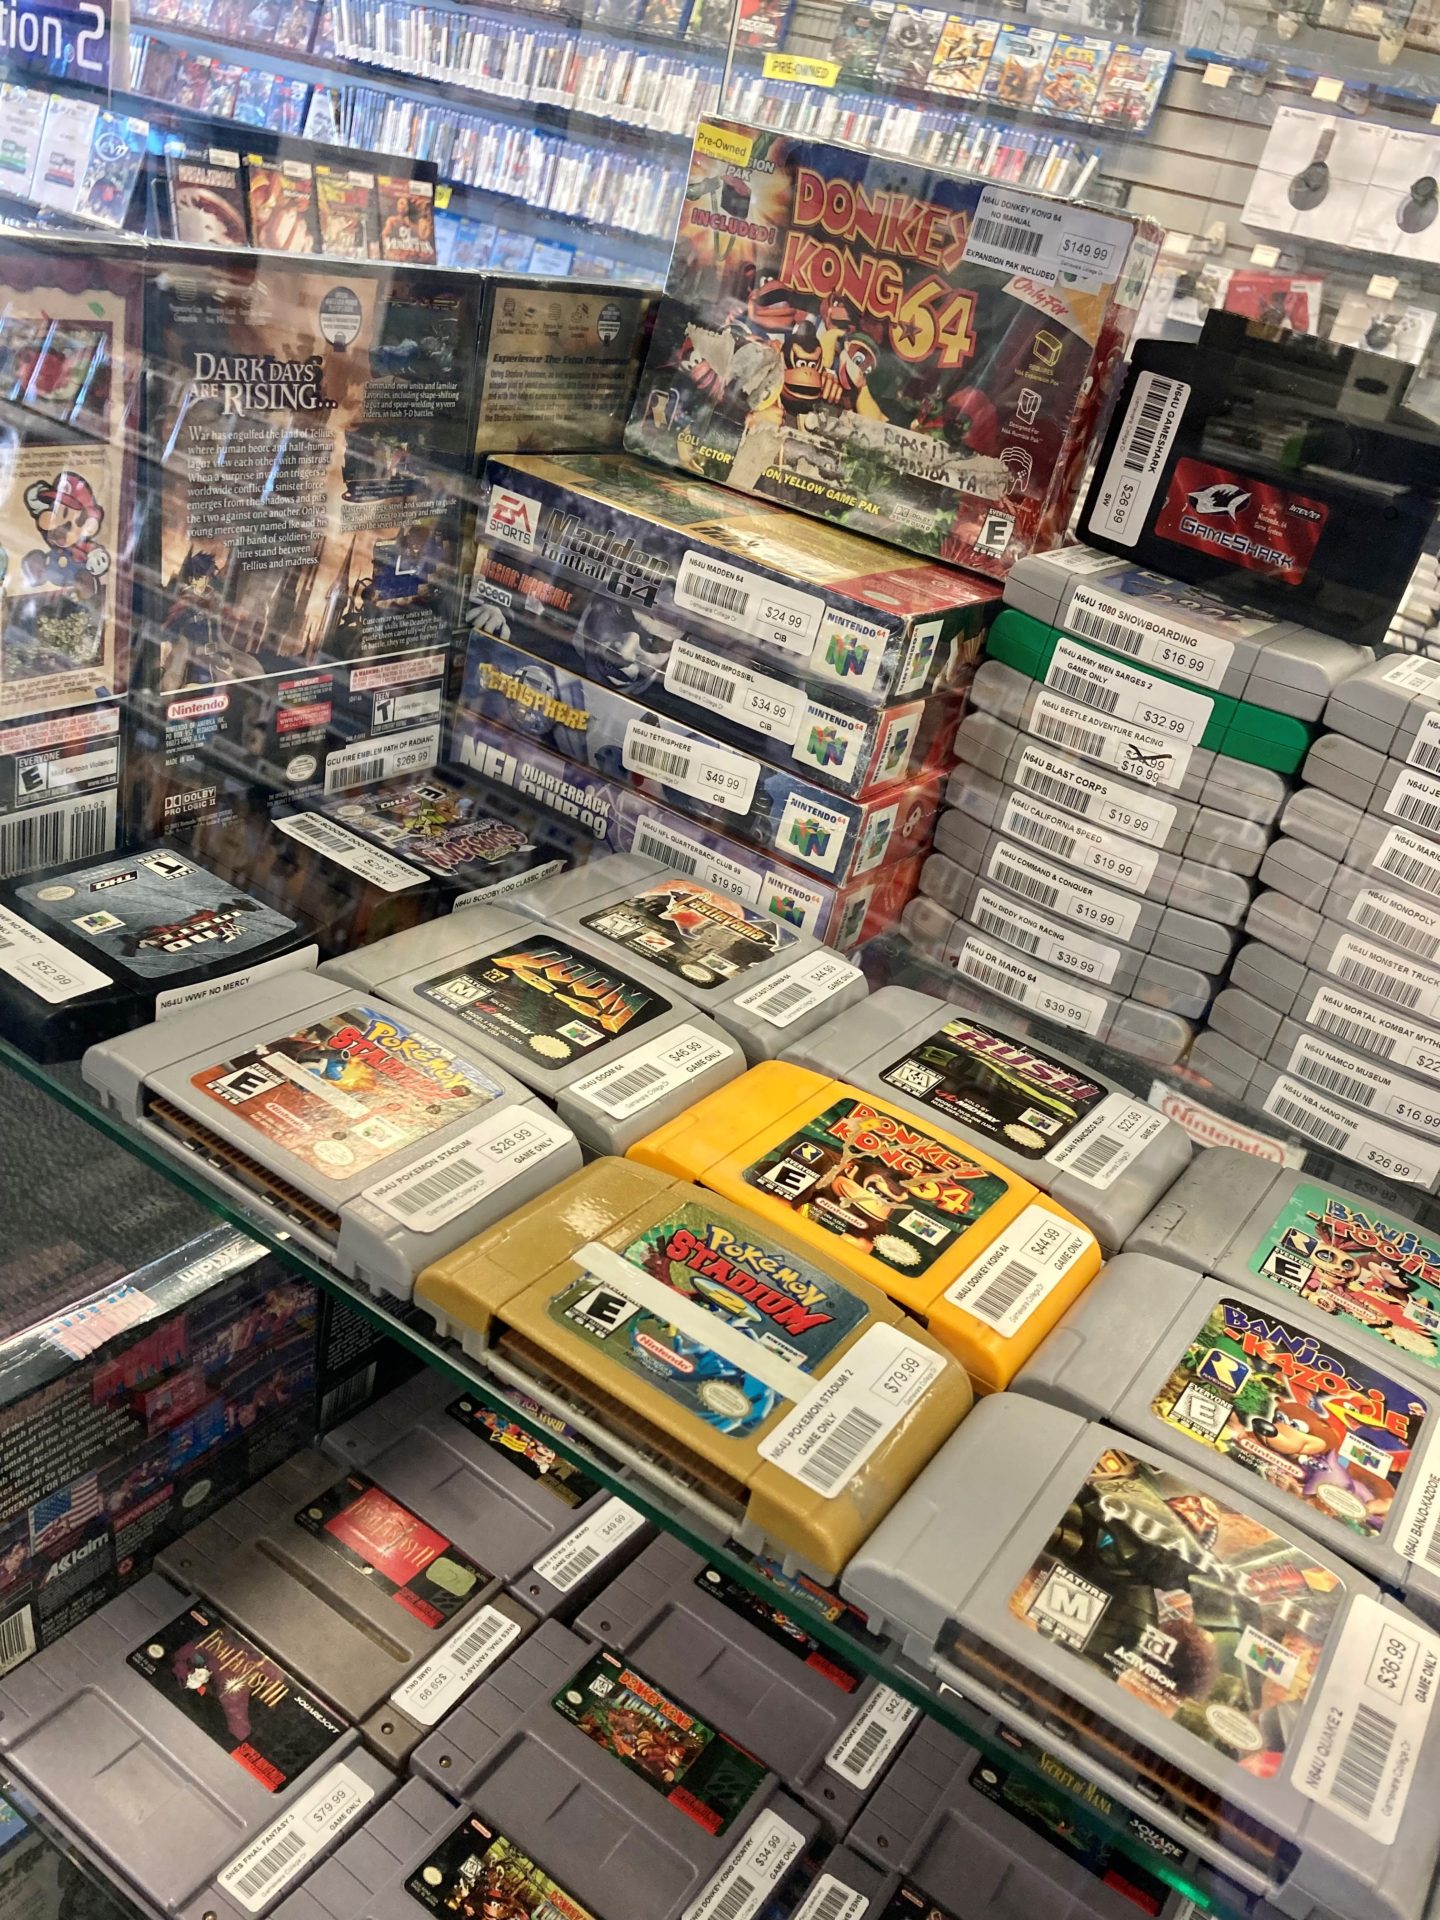 a display case showing several Nintendo 64 cartridges, including some with boxes